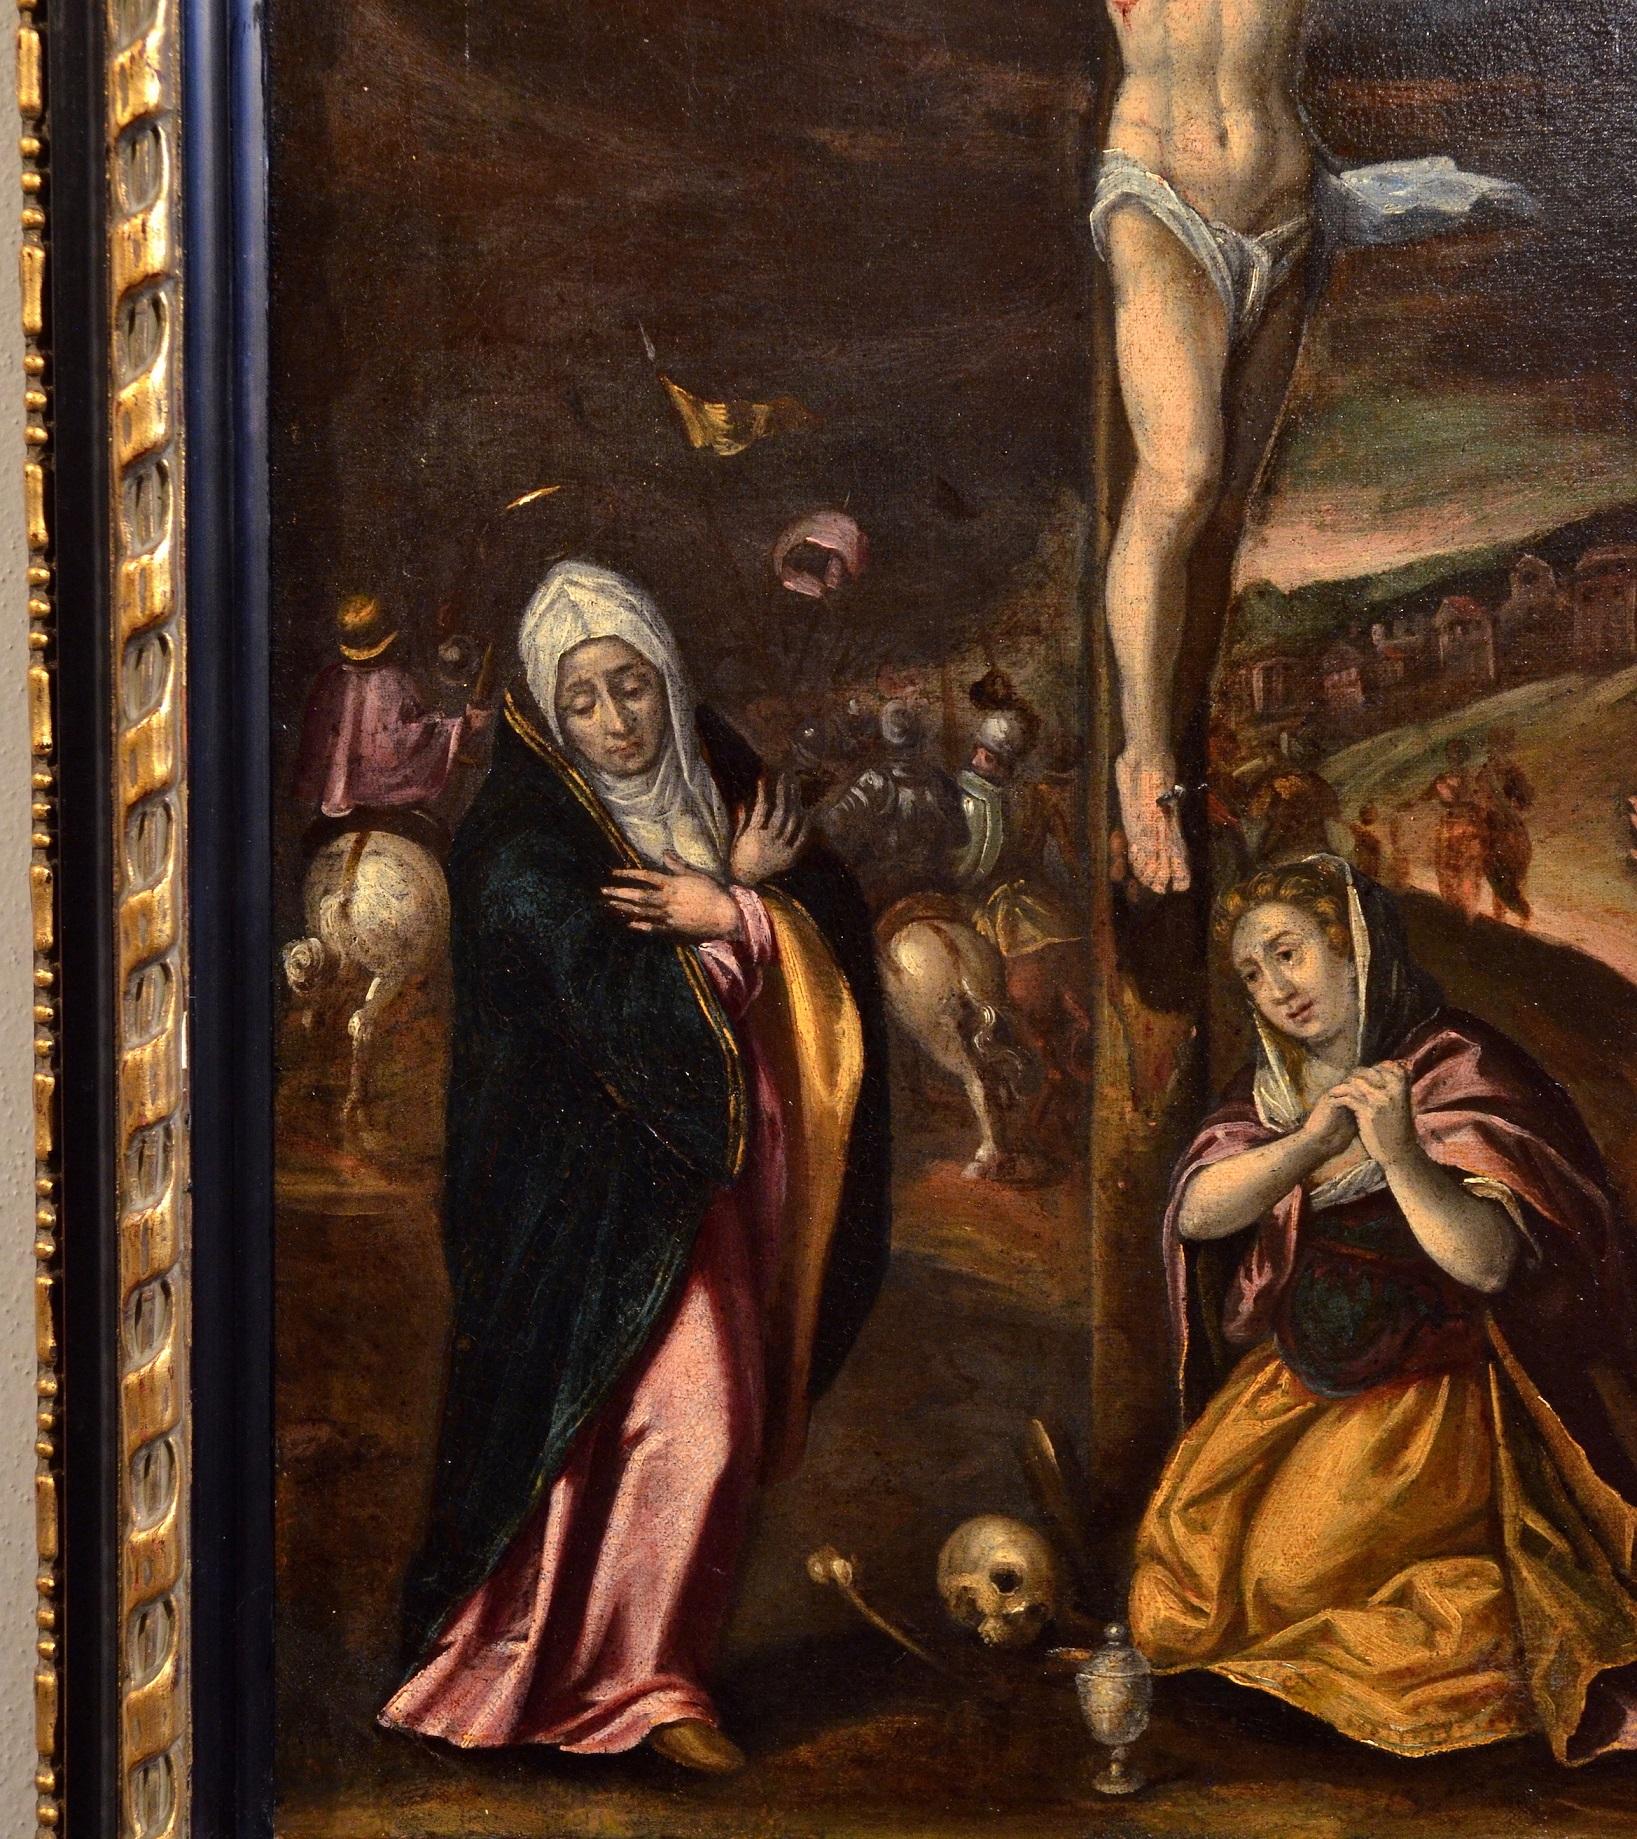 Flemish Paint Oil on canvas 16/17th Century Crucifixion Christ Old master  - Old Masters Painting by Flemish master late 16th - early 17th century